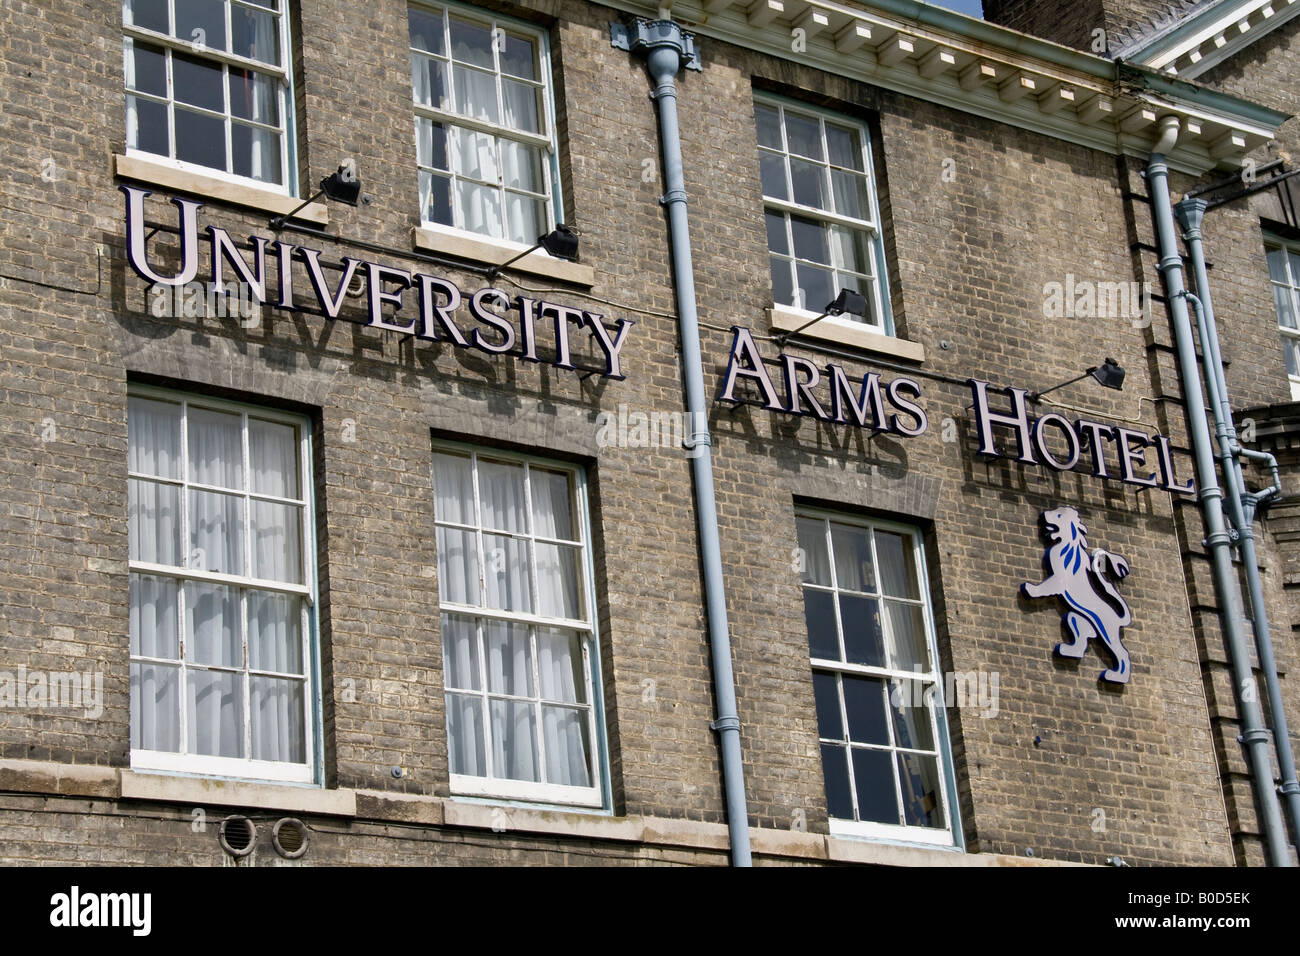 University Arms Hotel sign, Stock Photo